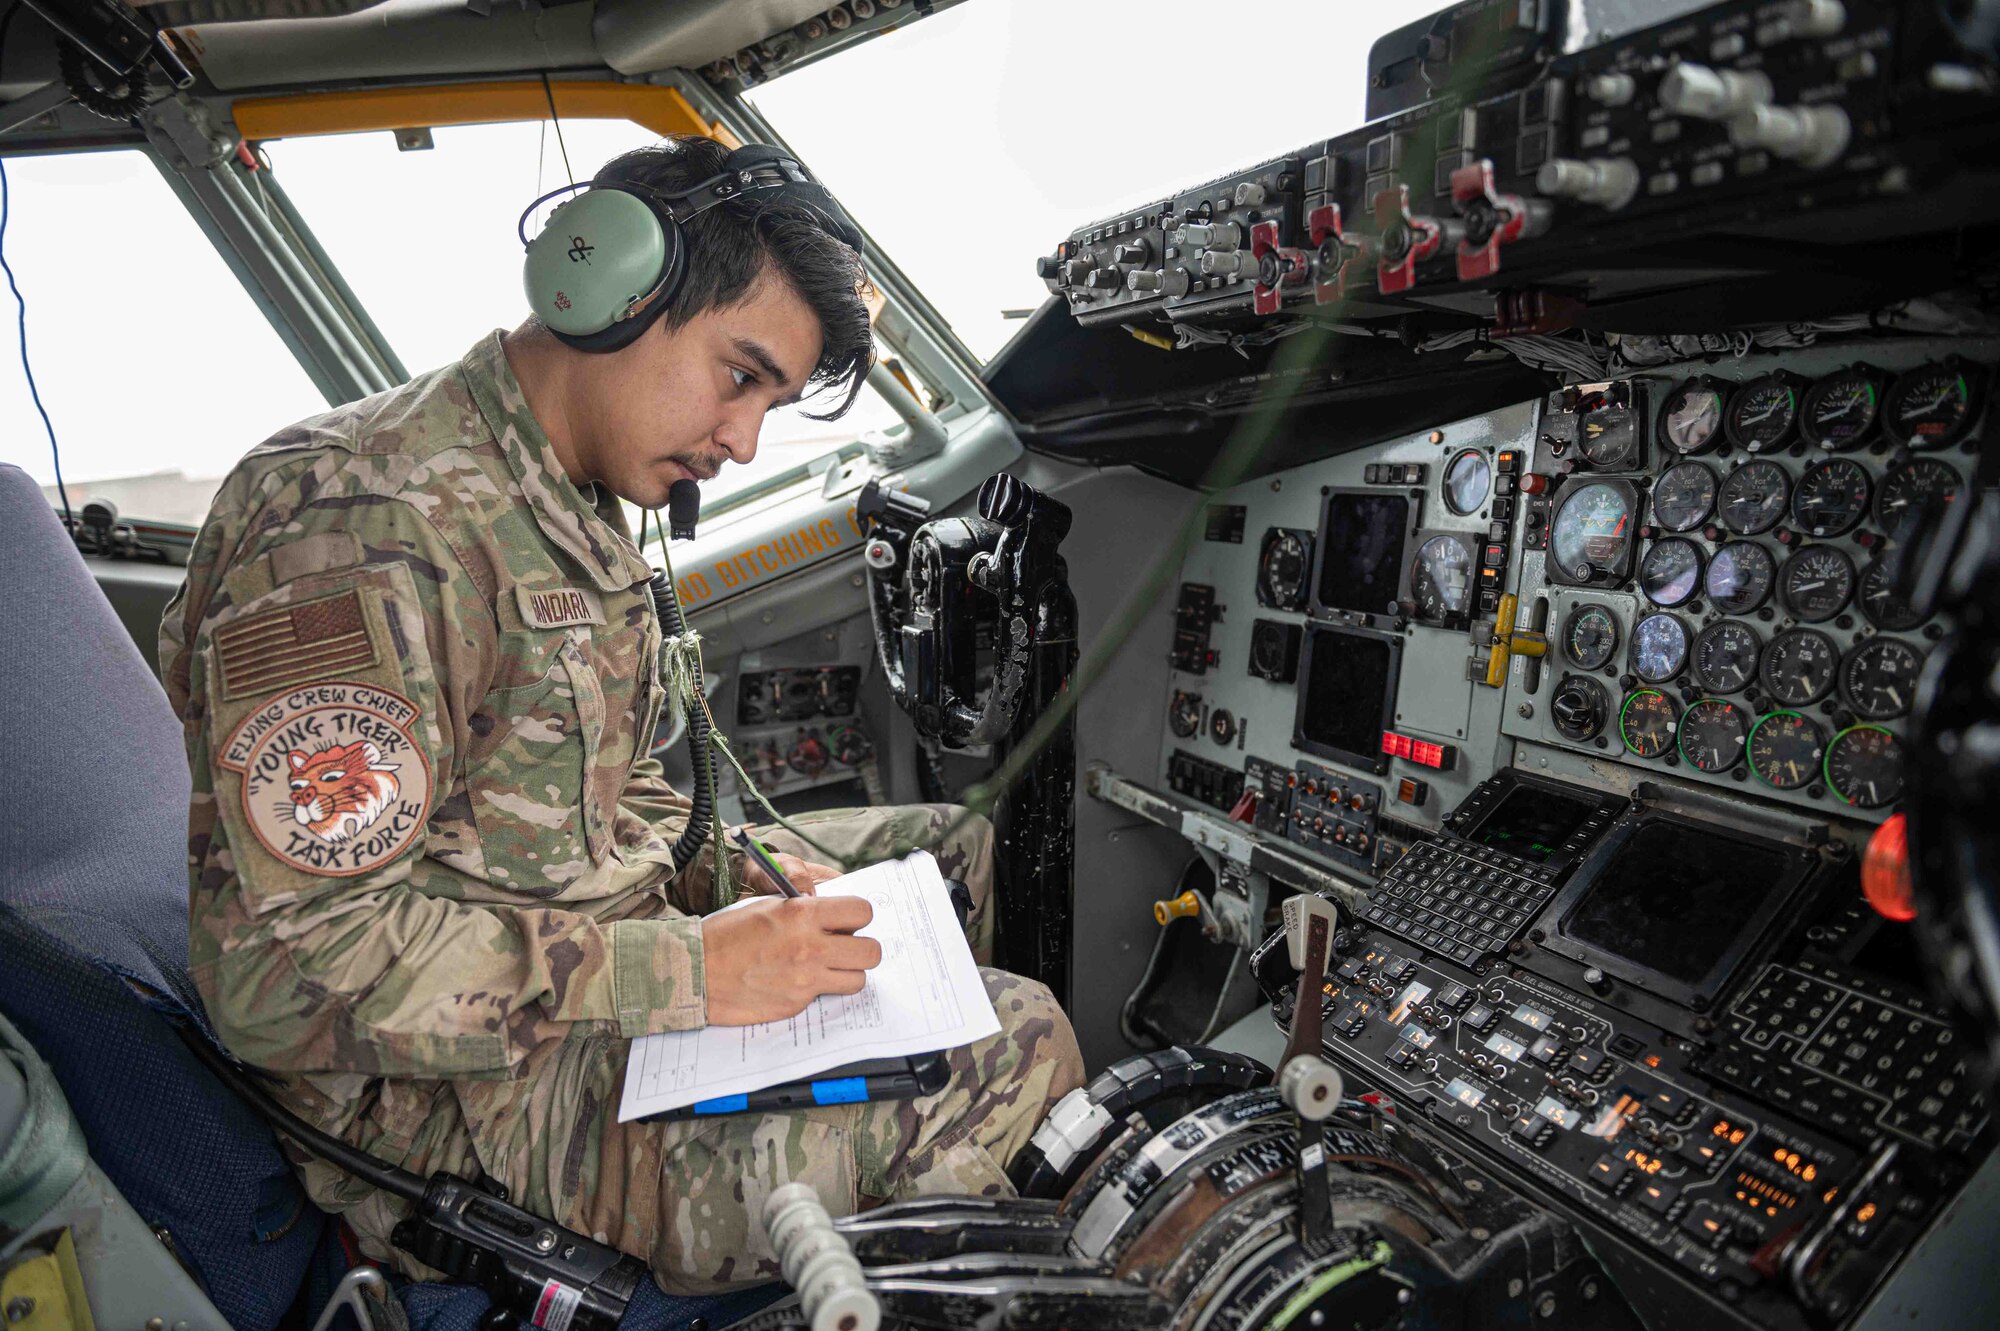 Airman sits in the cockpit of an aircraft writing down fuel levels